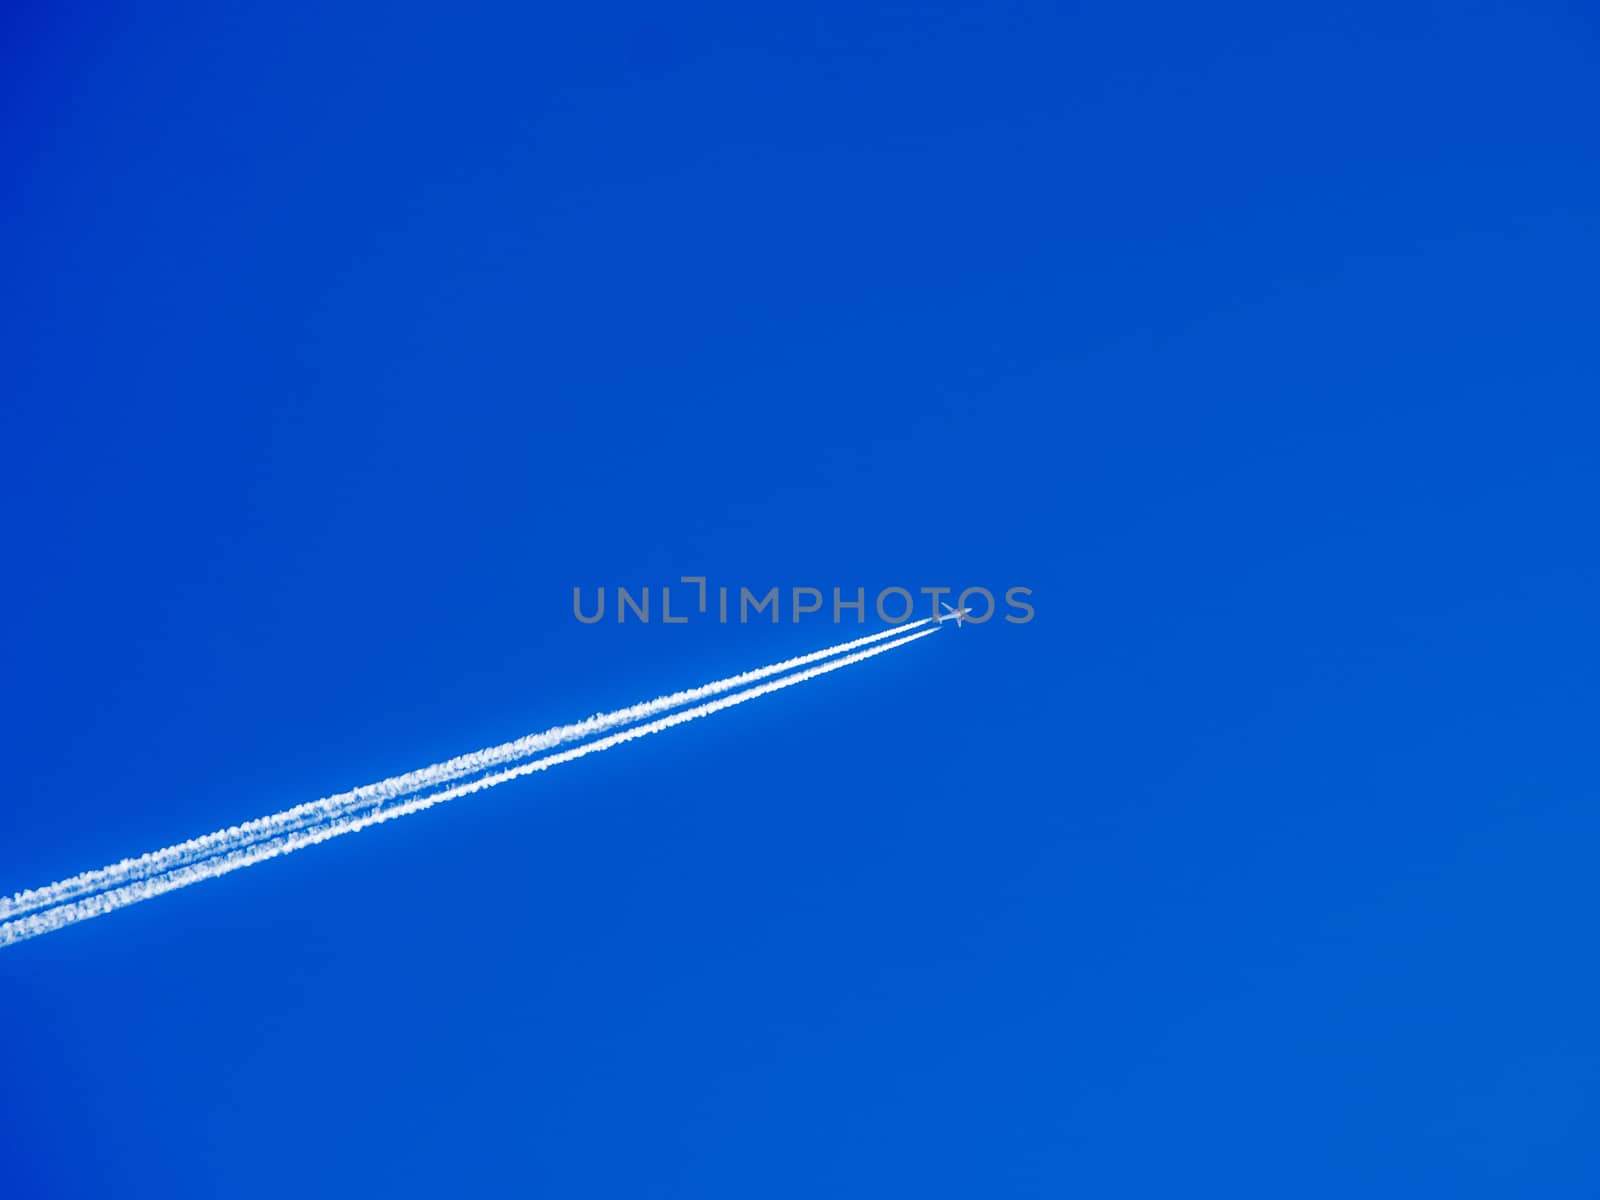 Aeroplane flying through clear blue sky with vapour trails